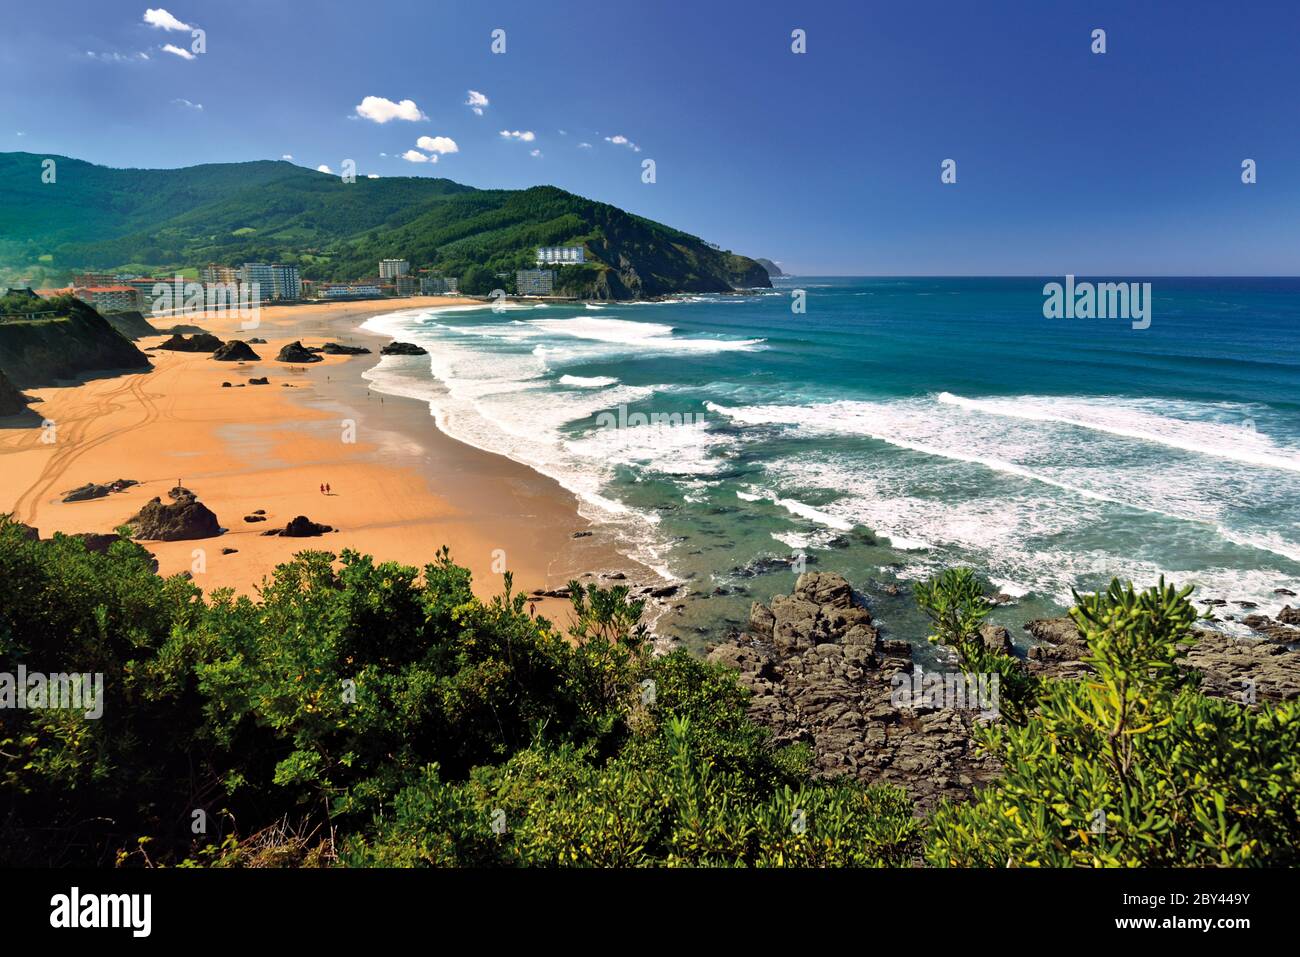 View to beautiful beach with large sand areal, rocks and green hills in the background. Stock Photo